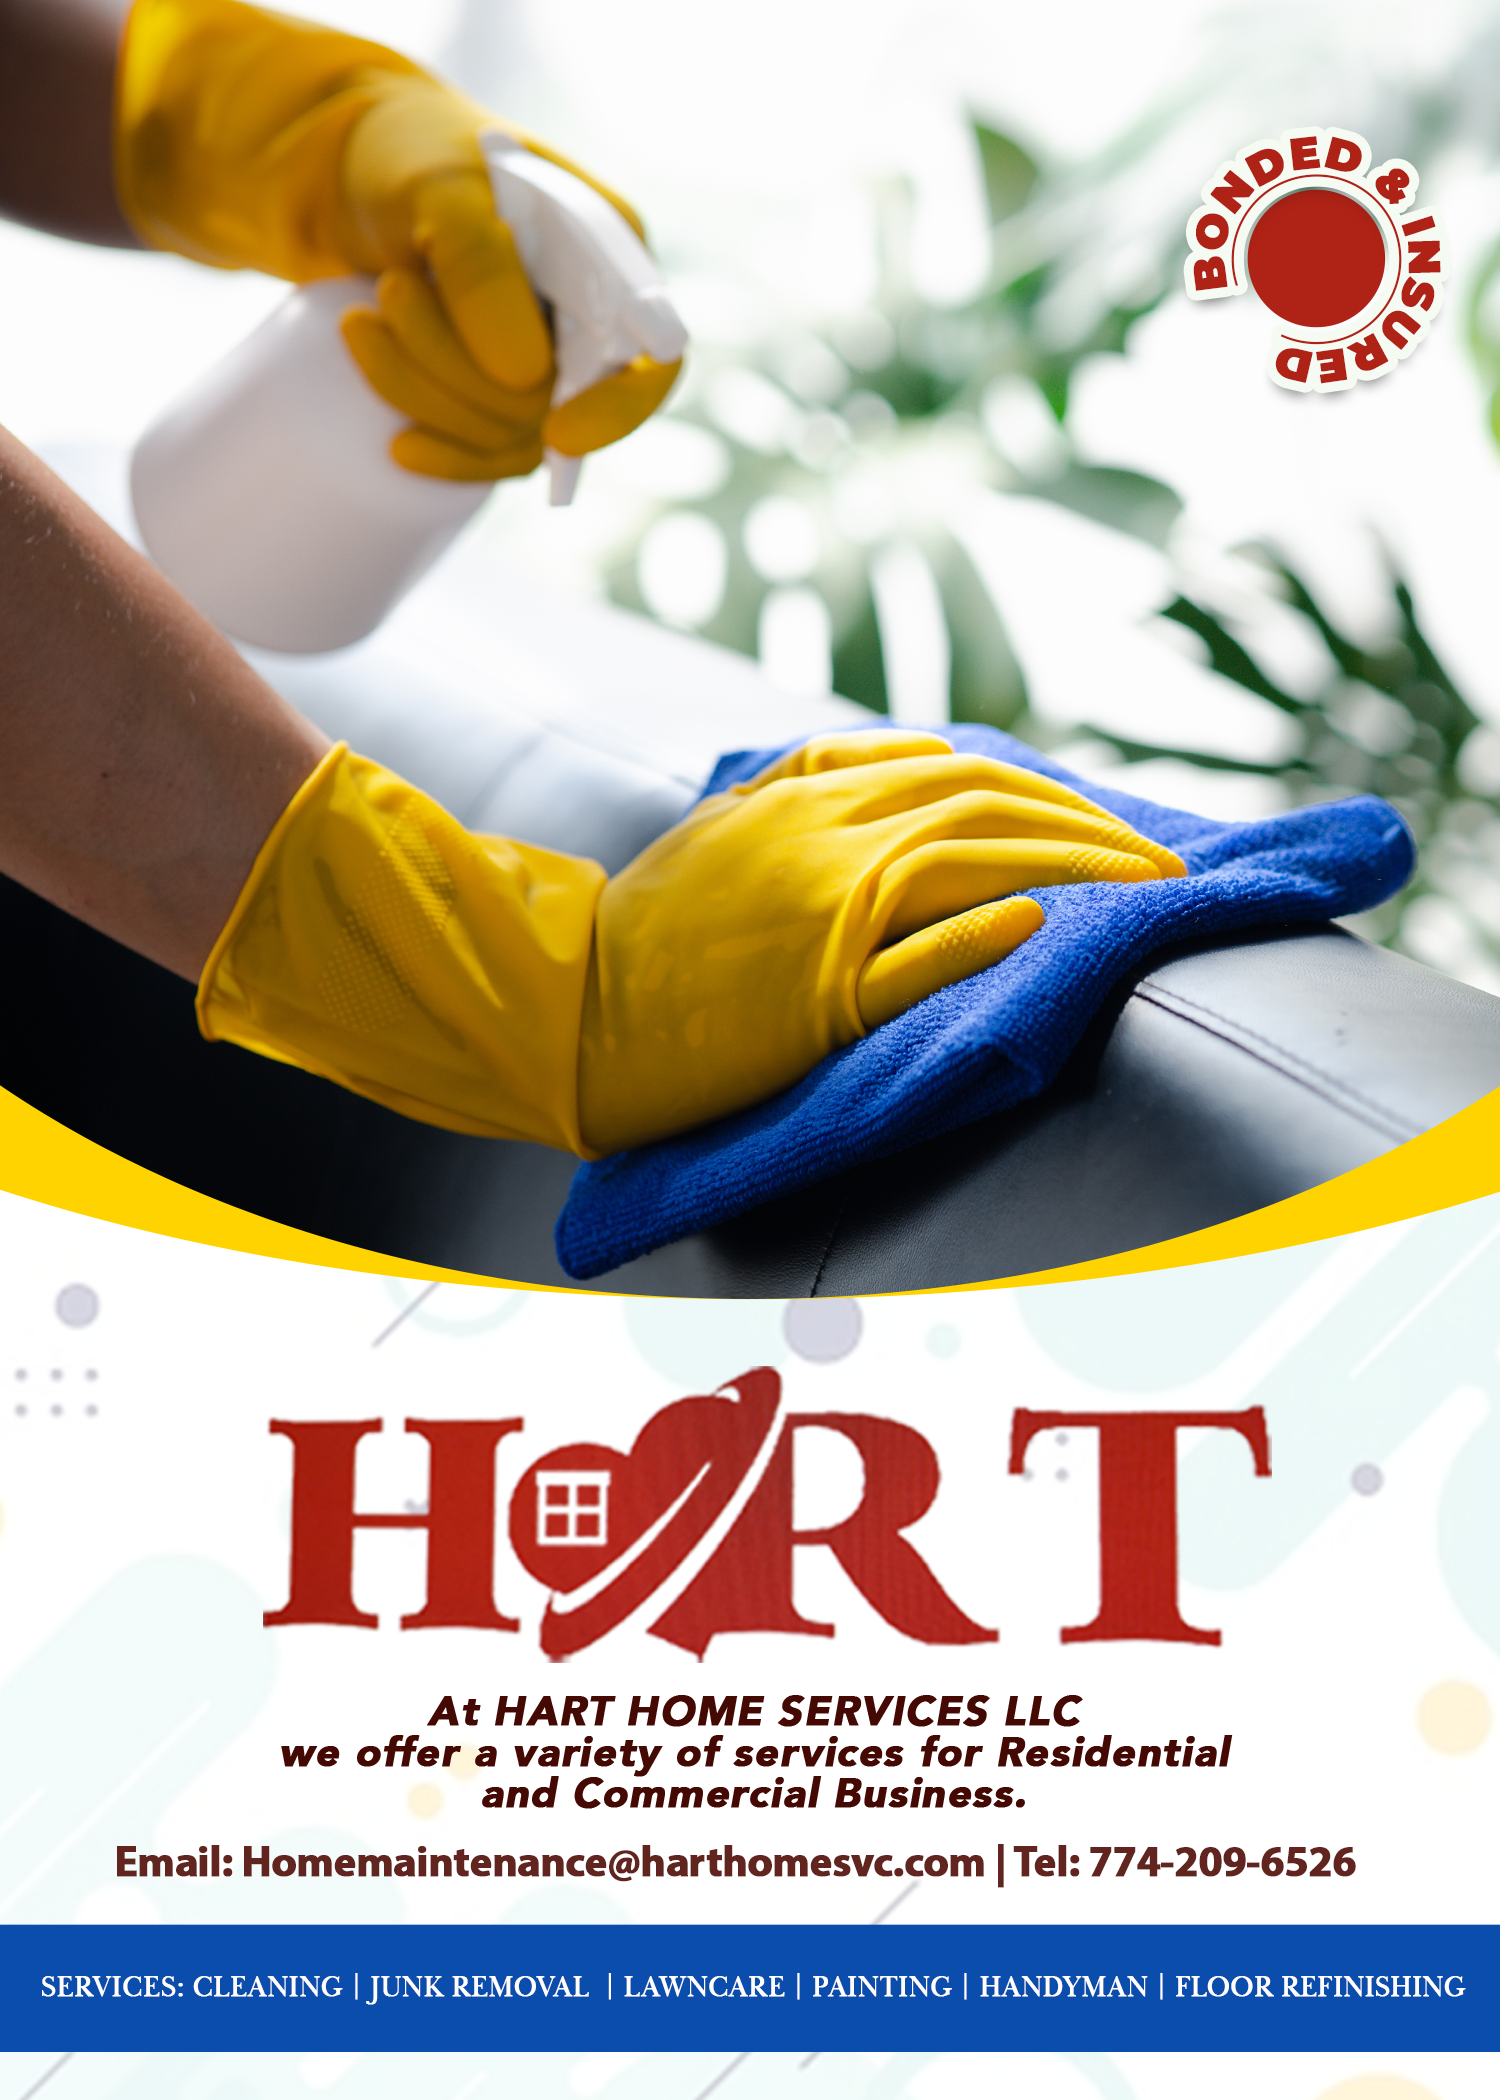 Hart Cleaning Services, LLC Logo